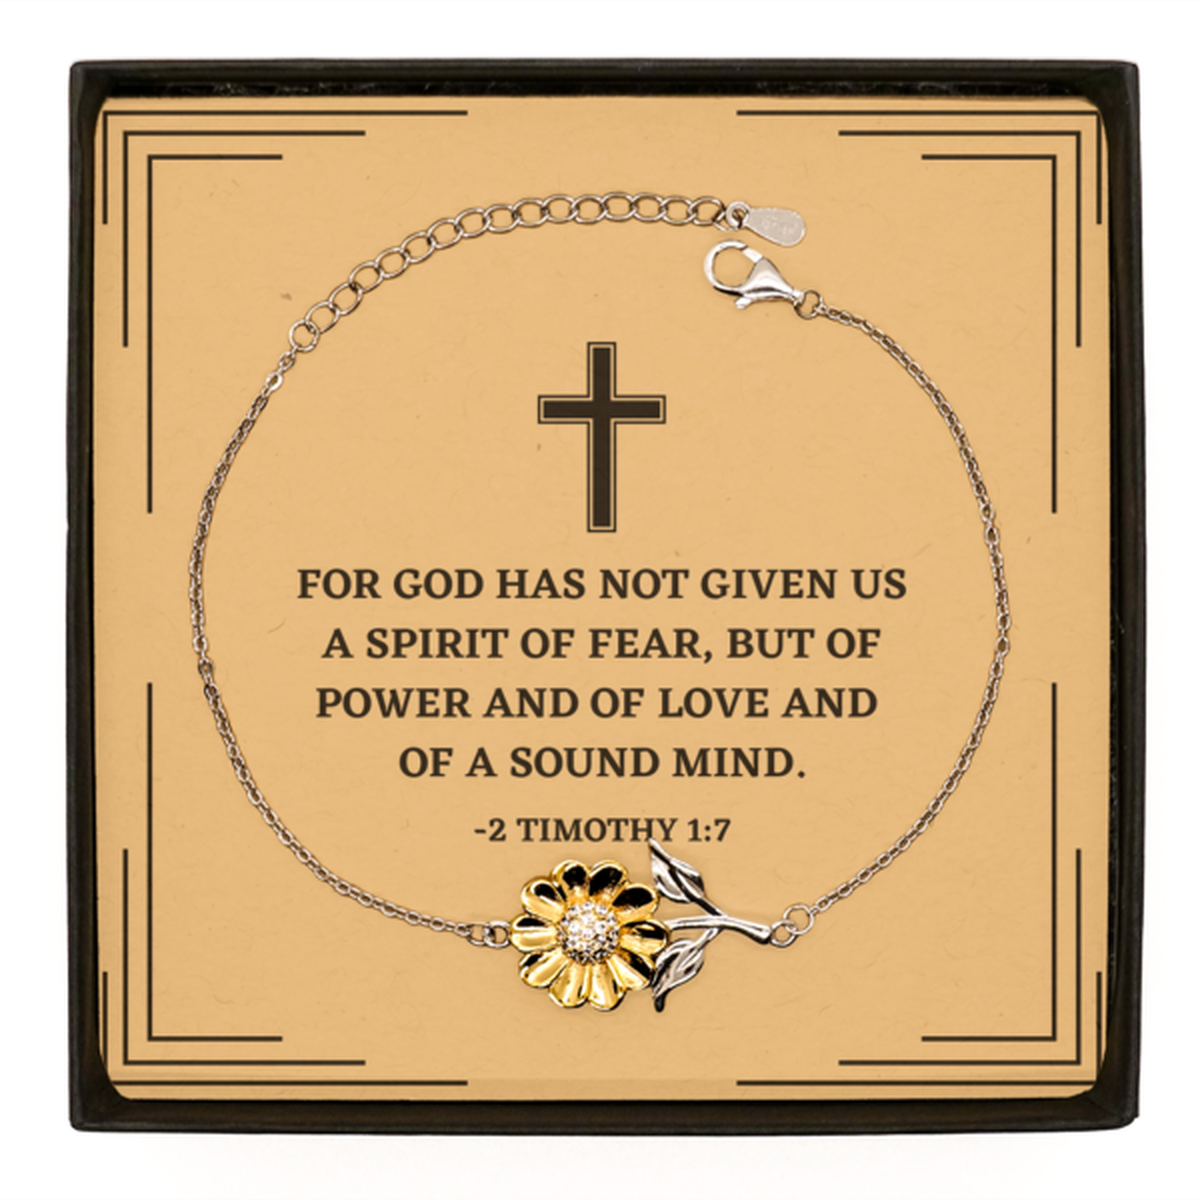 Baptism Gifts For Teenage Boys Girls, Christian Bible Verse Sterling Silver Sunflower Bracelet, For God has not given us, Confirmation Gifts, Bible Verse Card for Son, Godson, Grandson